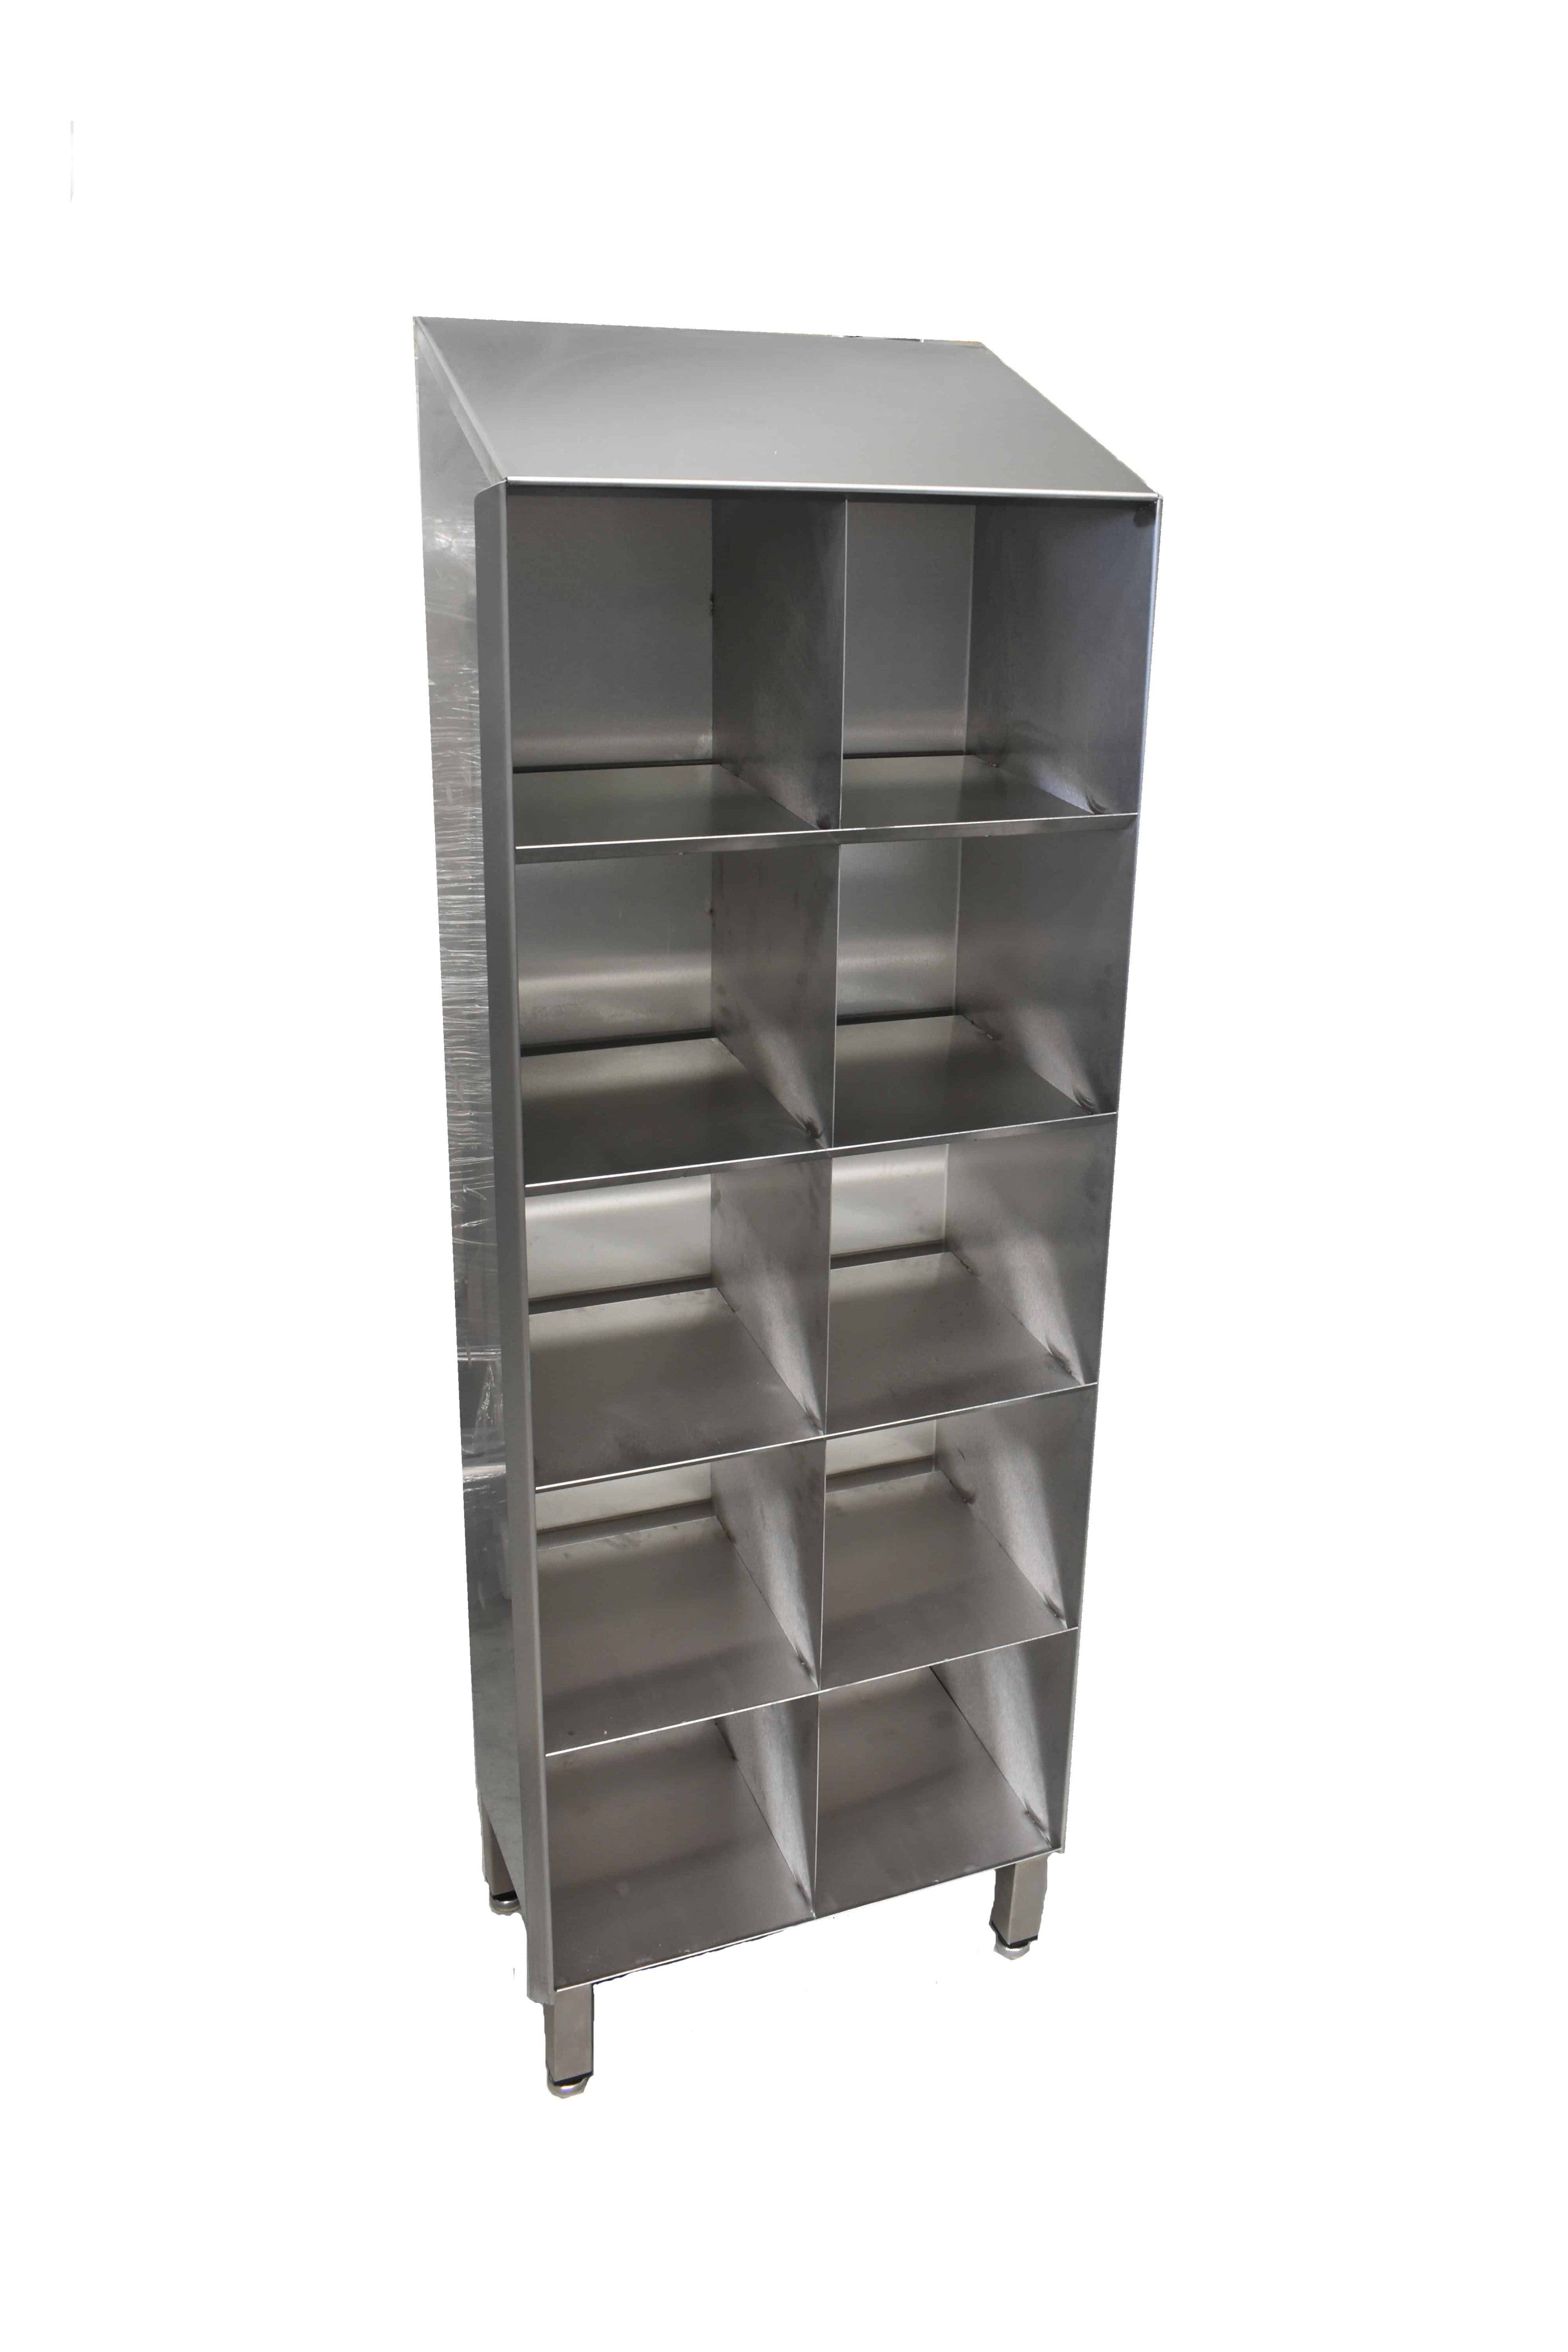 Stainless steel shoe and garment storage cupboard